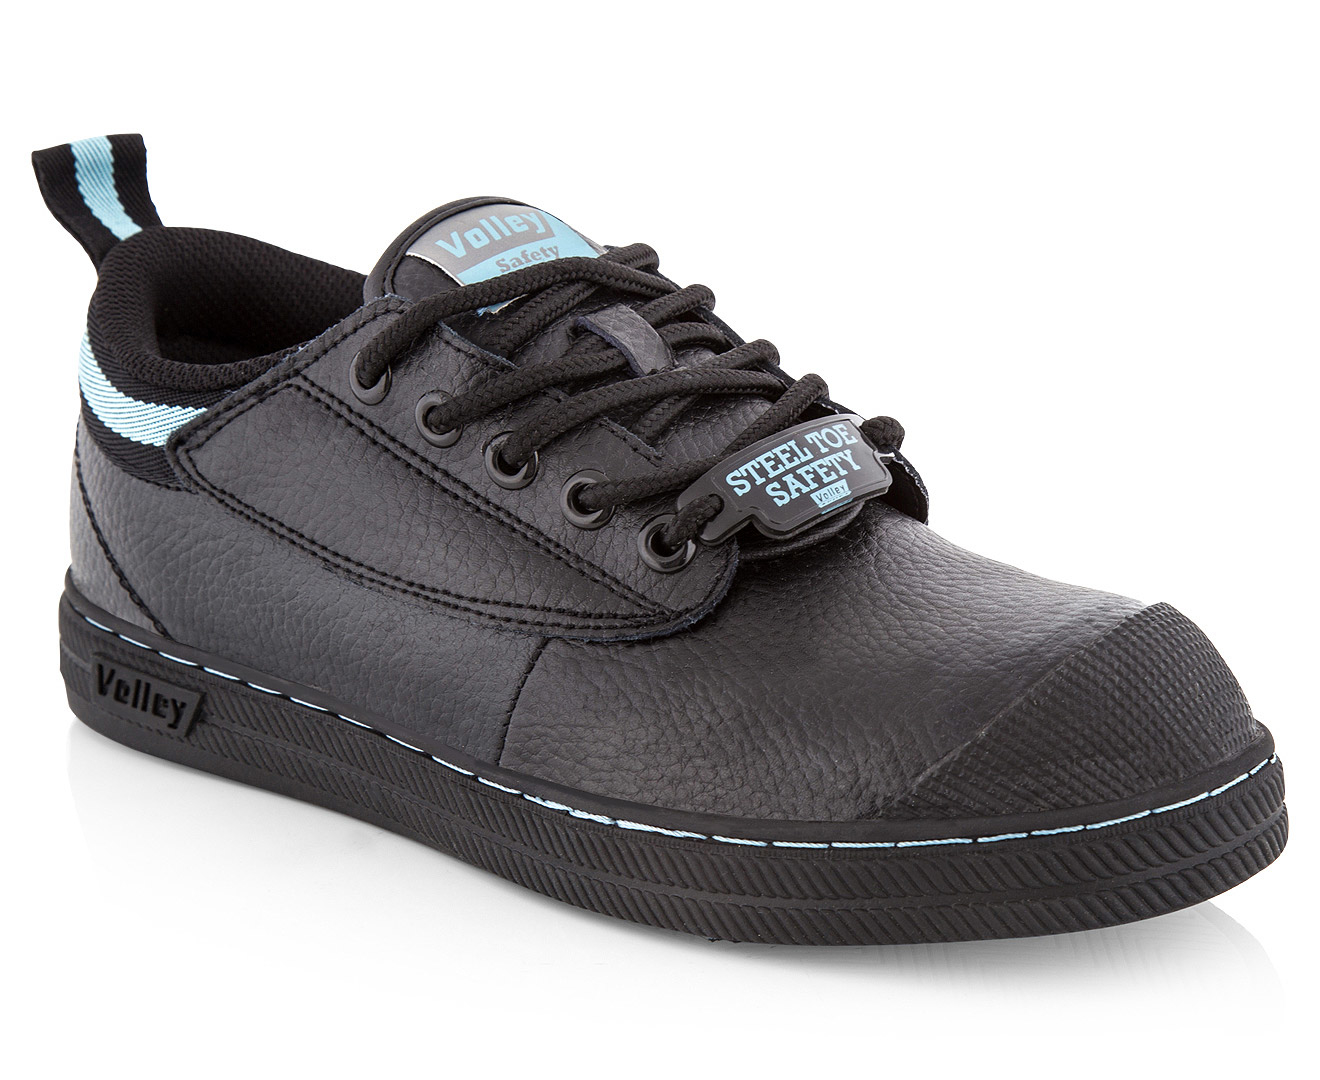 Volley Women's Safety Shoe - Black/Blue Leather